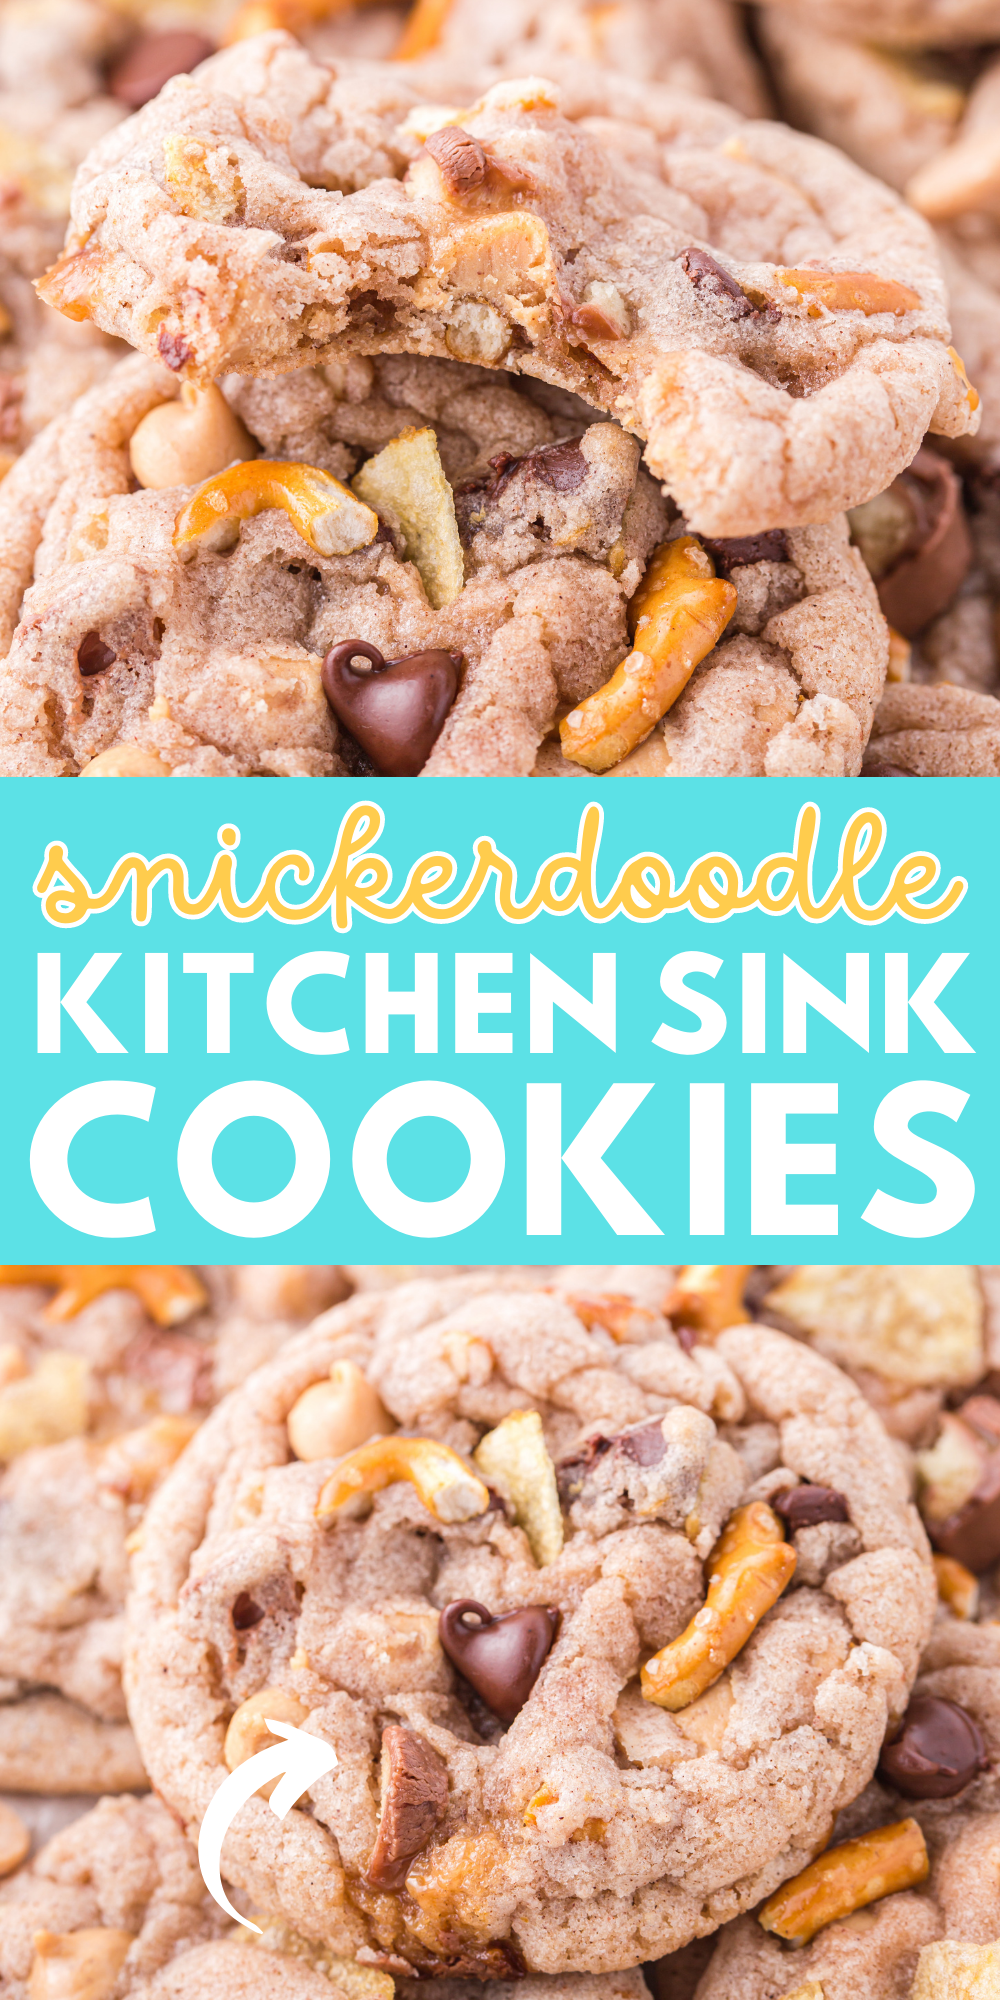 snickerdoodle cookies promotional pin image